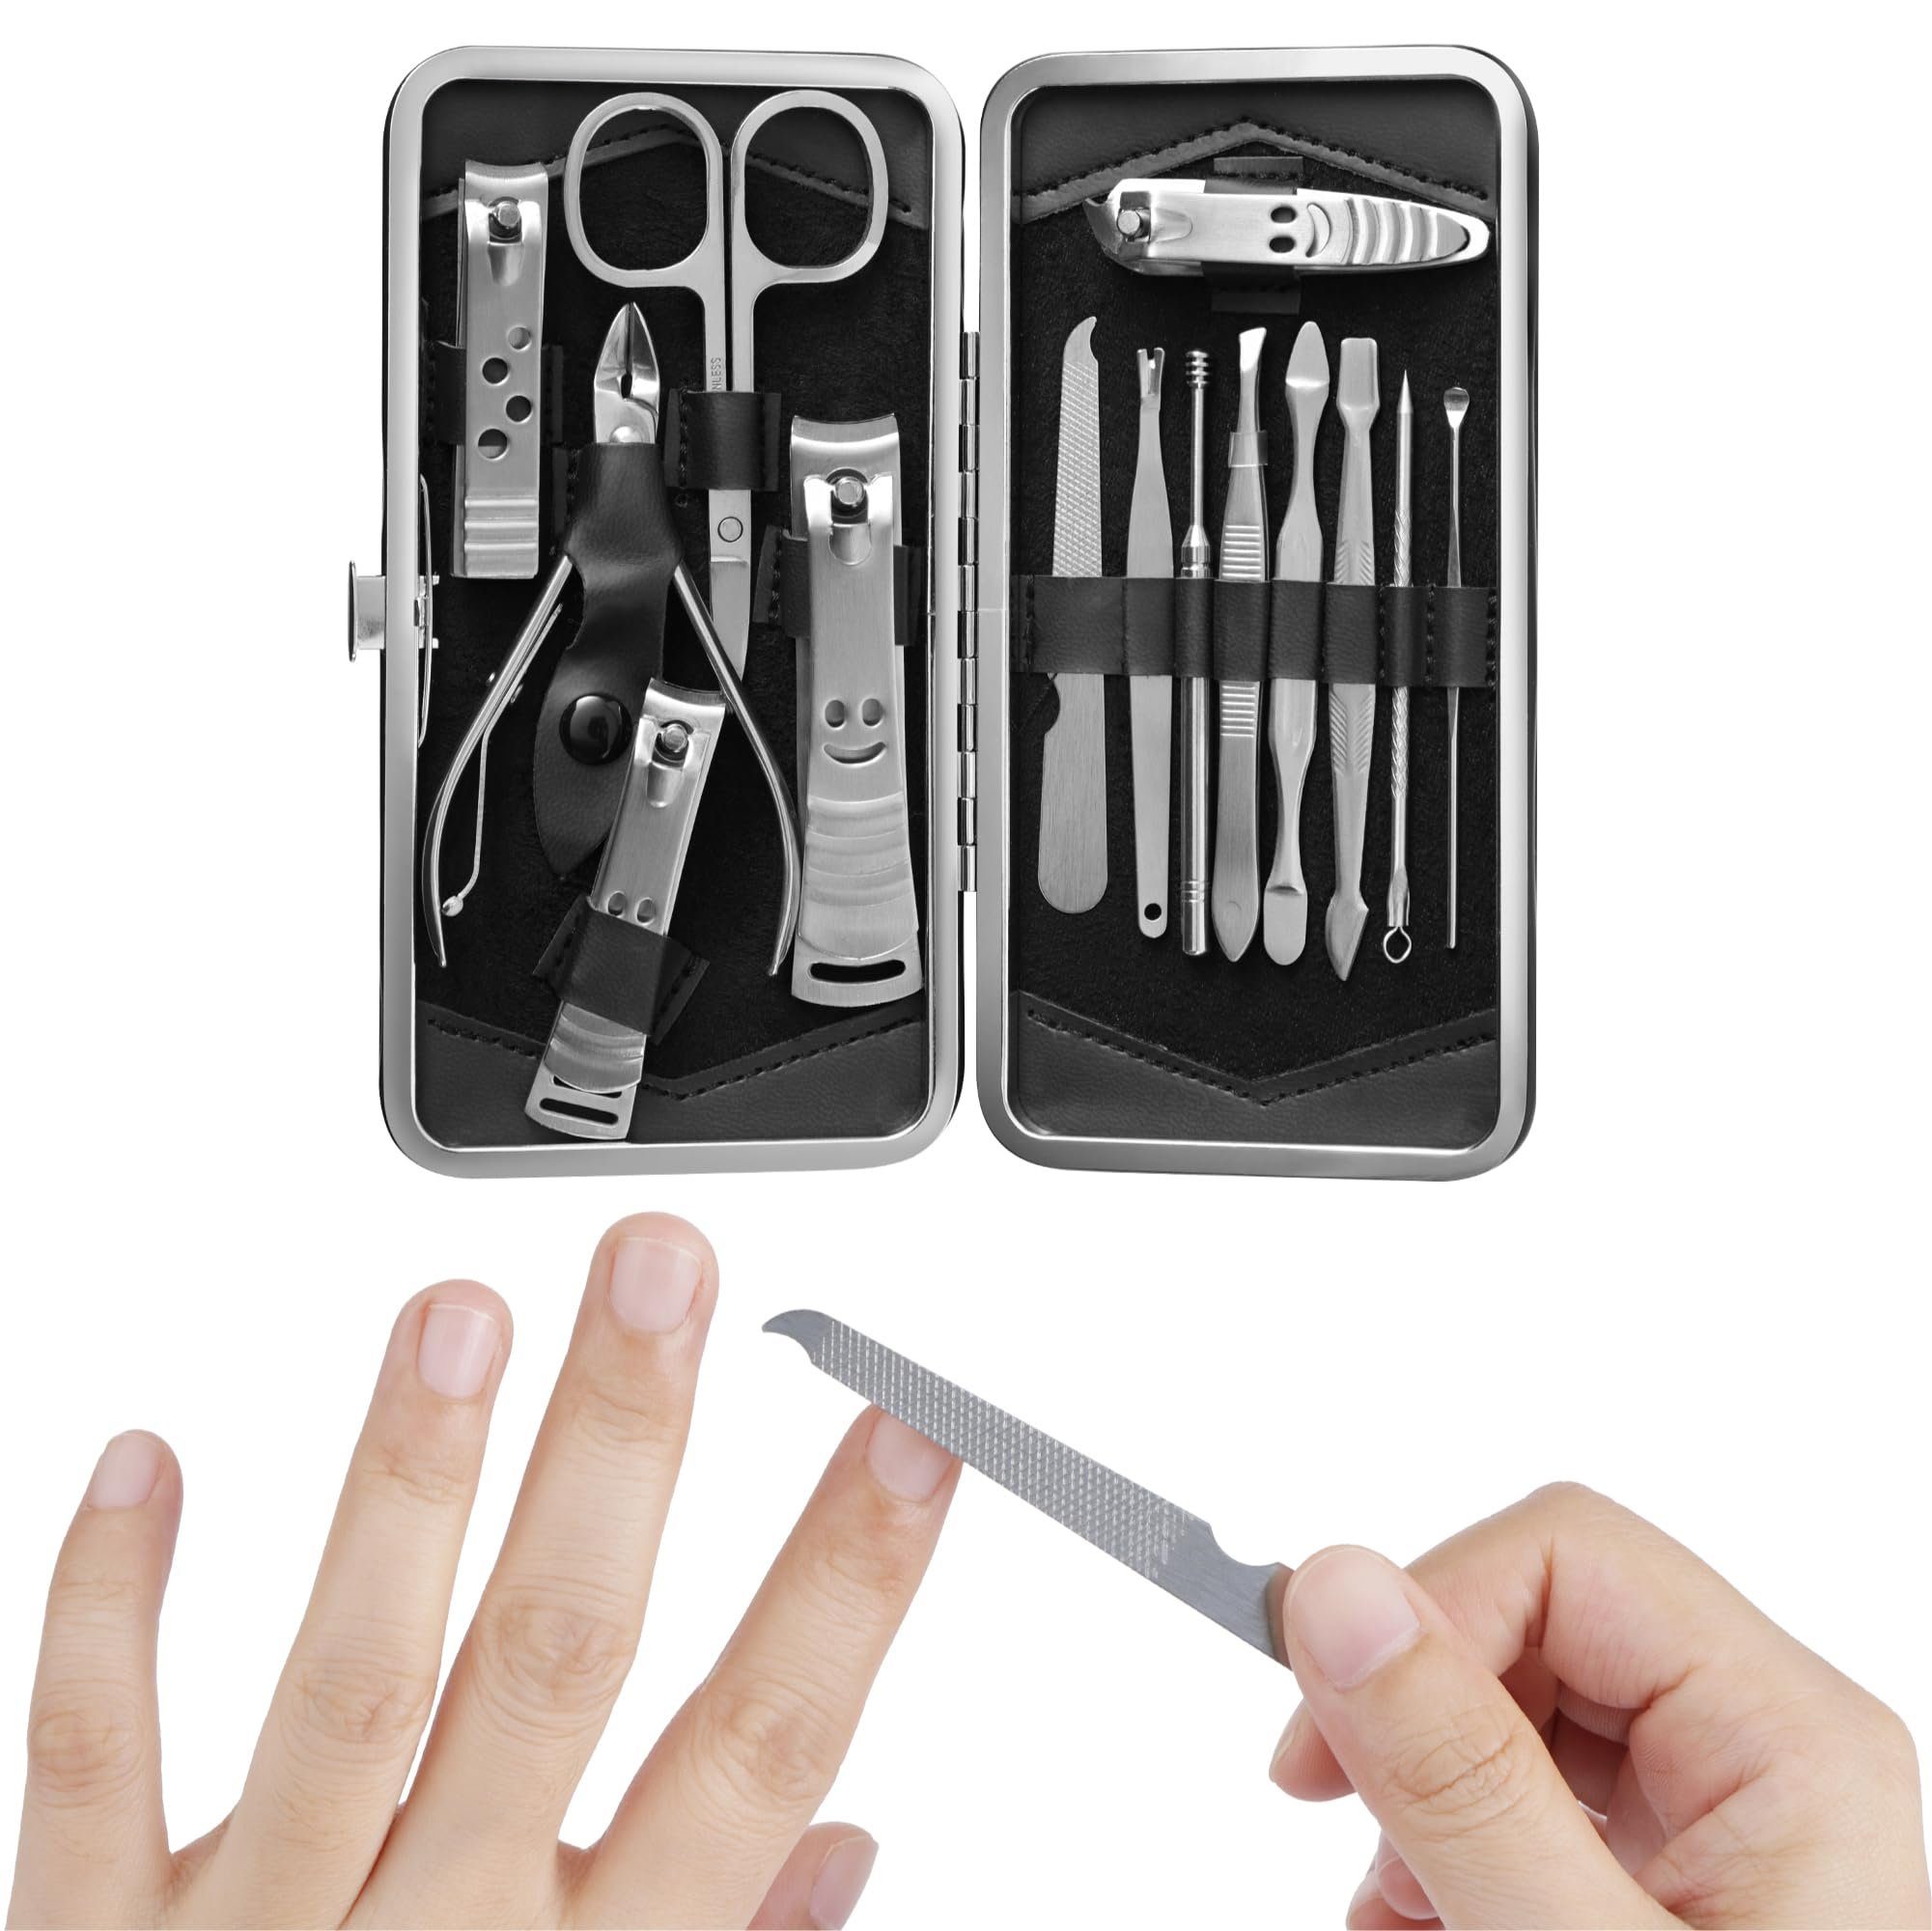 H&S Nagelknipser Nail Clippers Manicure Set_Black